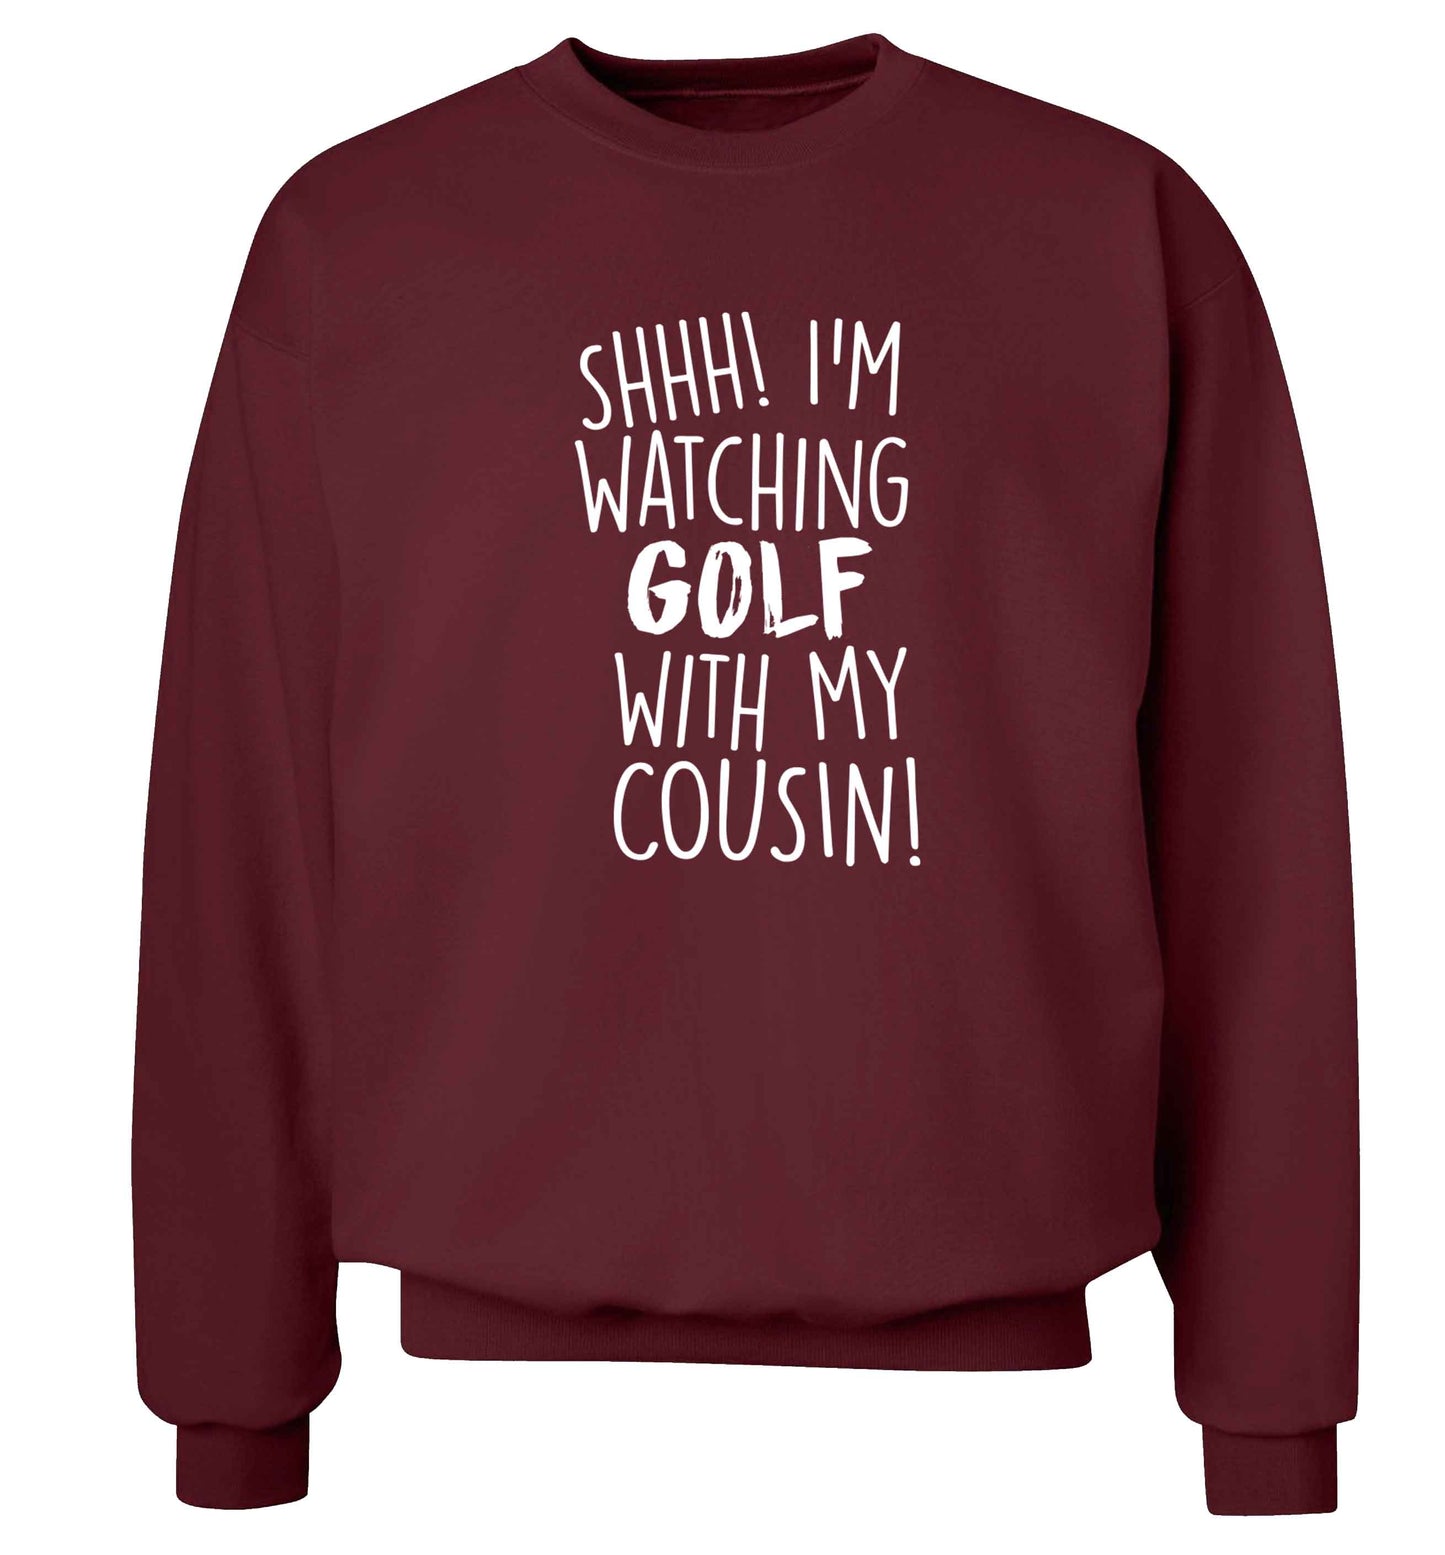 Shh I'm watching golf with my cousin Adult's unisex maroon Sweater 2XL